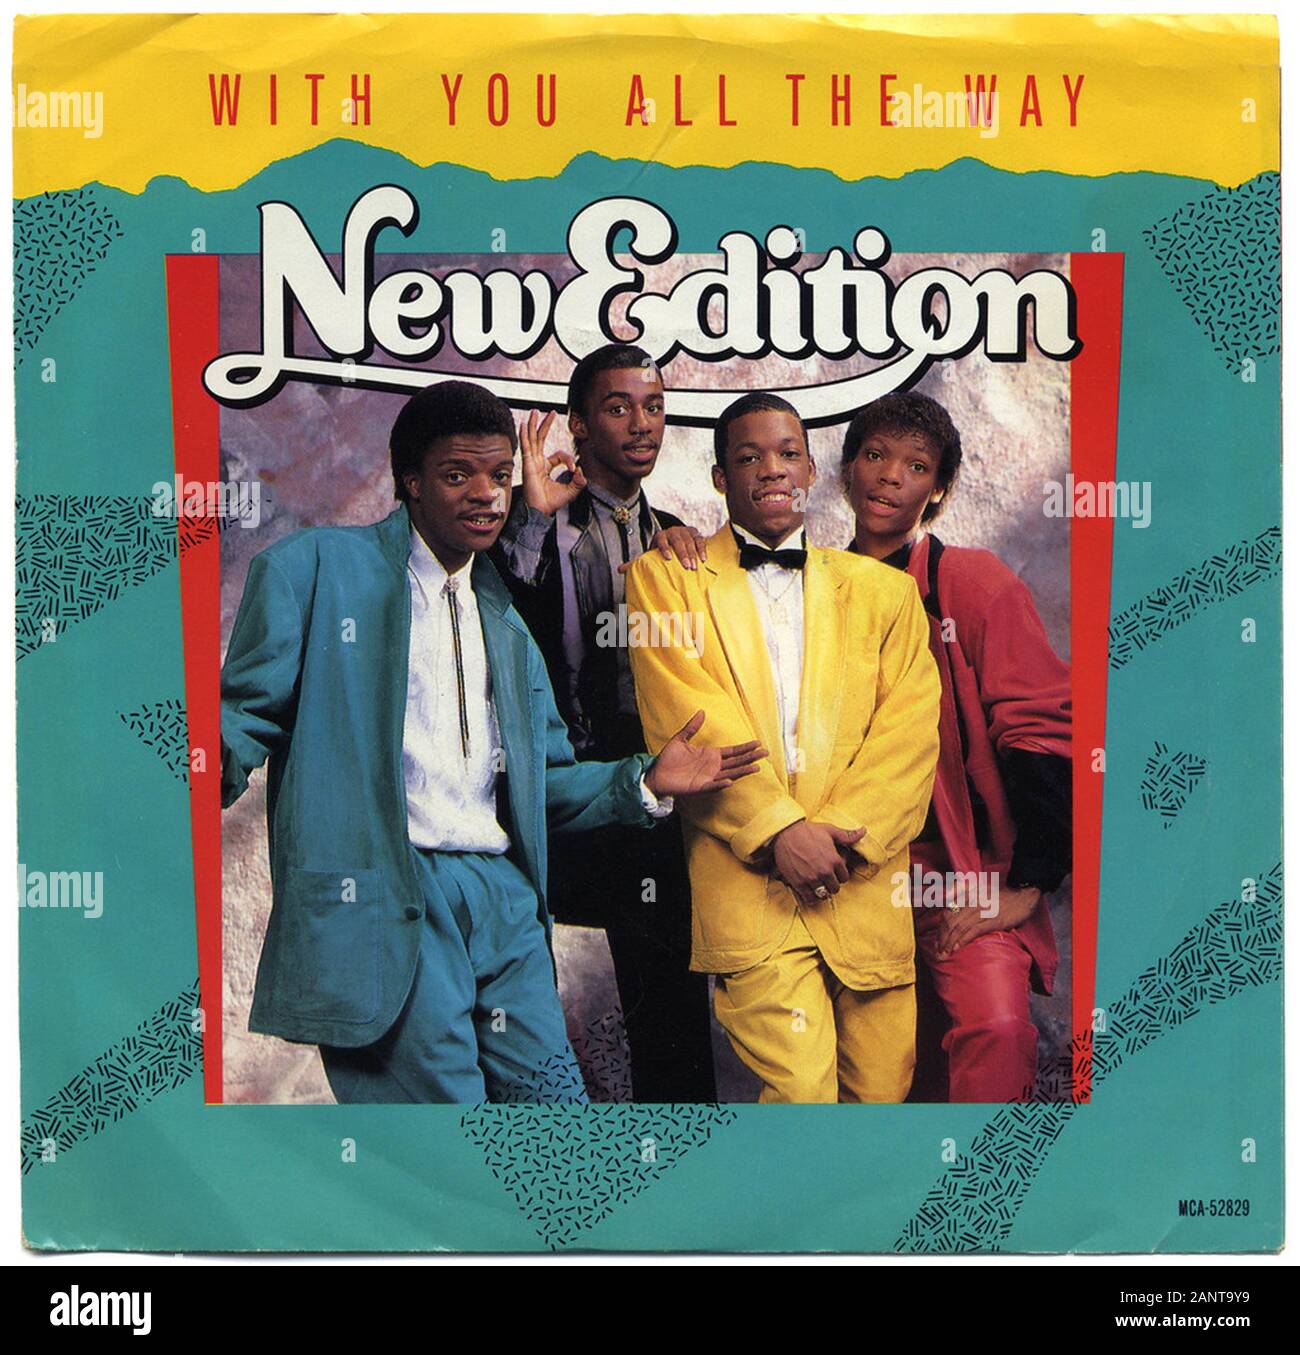 New Edition - With You All The Way - Classic vintage vinyl album Stock Photo